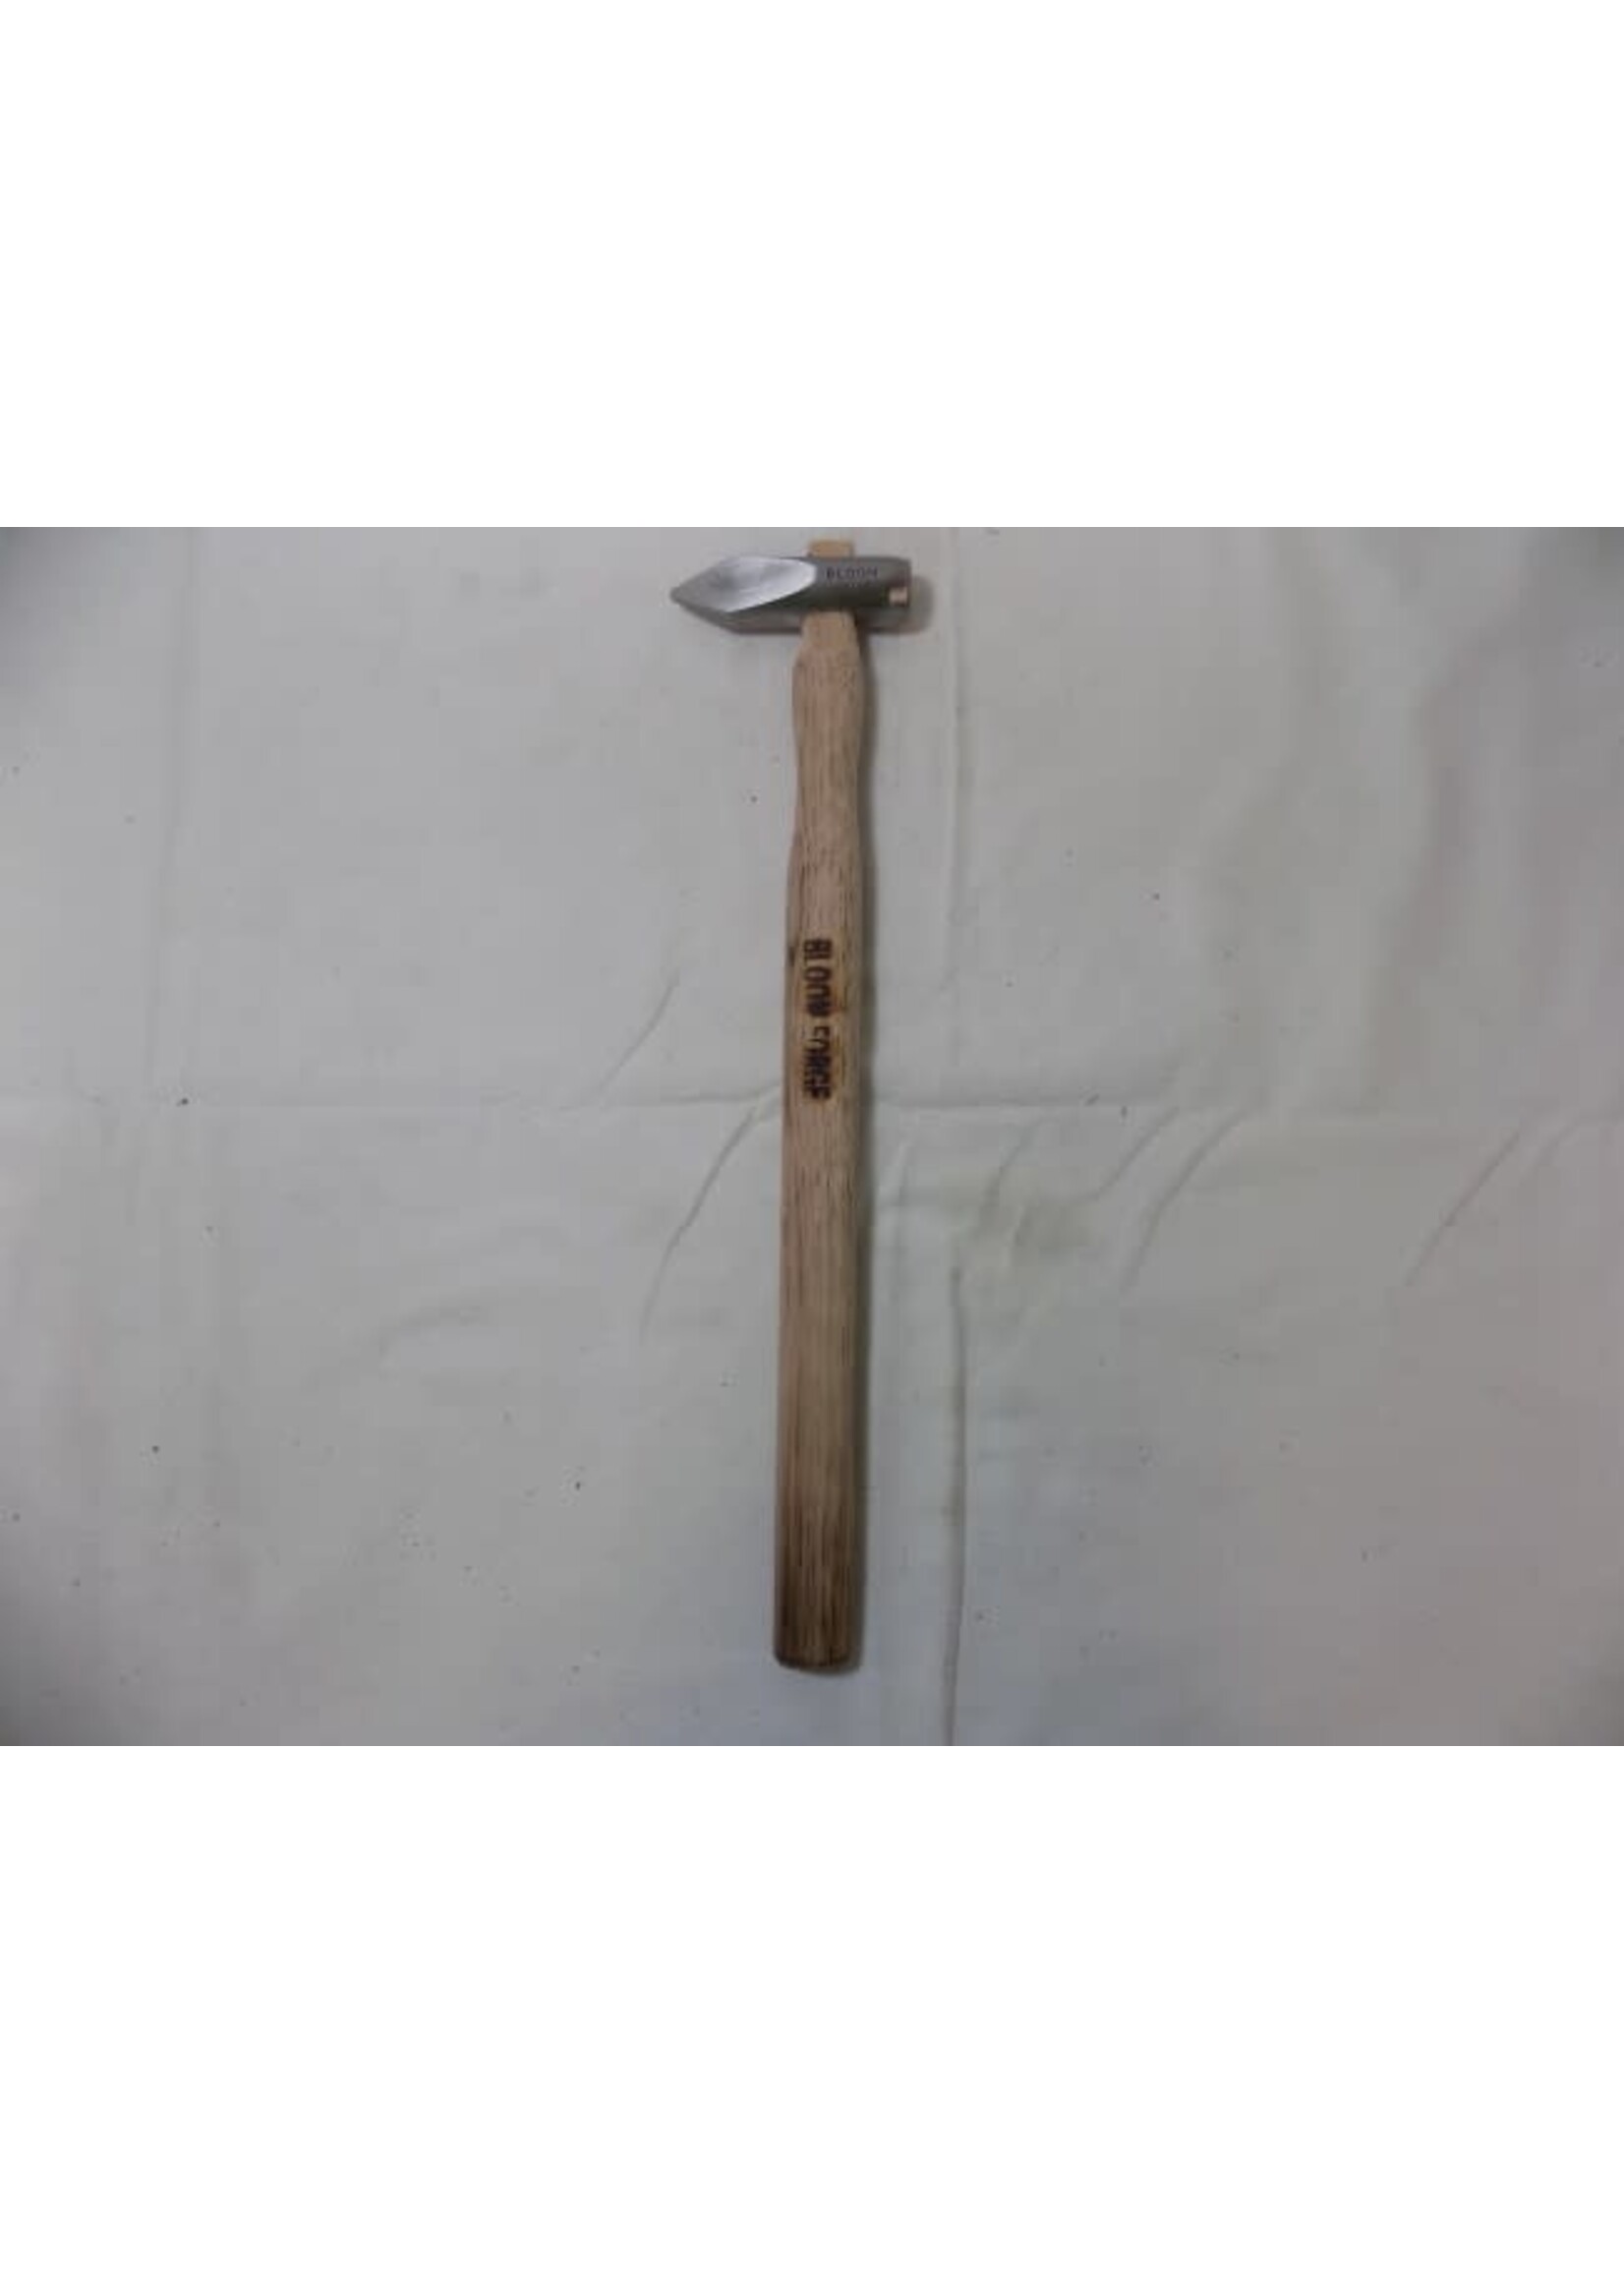 Bloom Forge Bloom Forge E Head steel handled forepunch